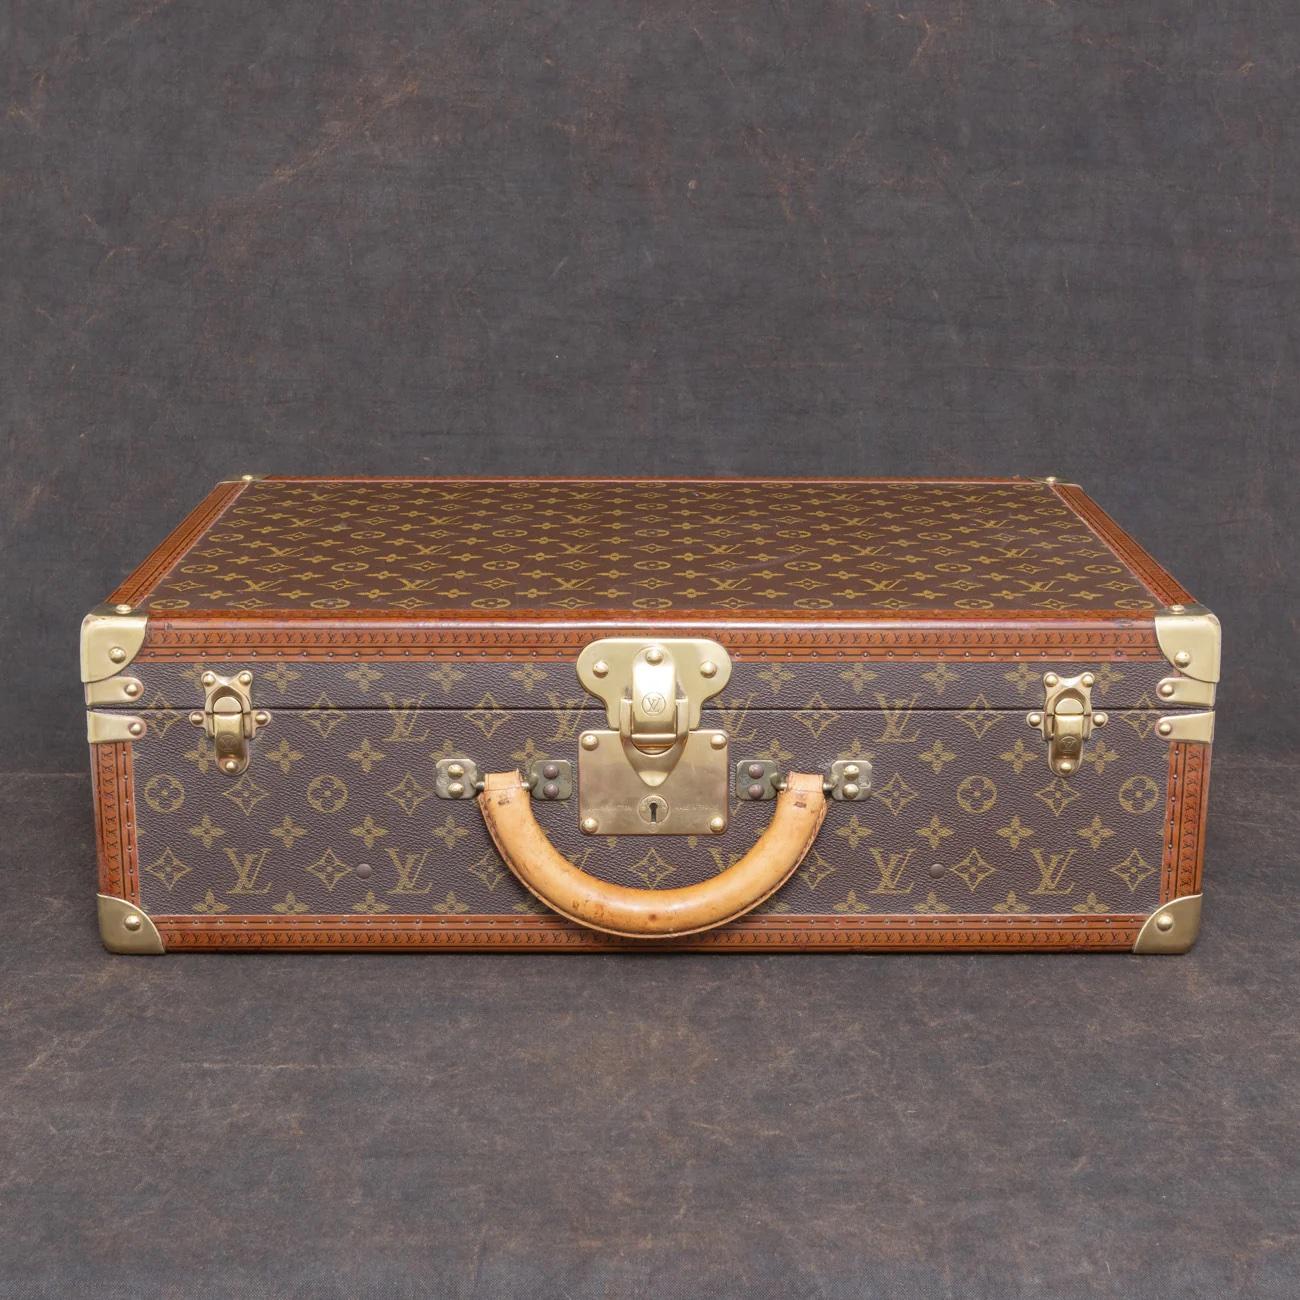 Louis Vuitton large ‘Bisten’ suitcase in LV monogram pattern coated canvas with edges trimmed in lozine and polished brass fittings.

Securing the lid of the case is a central sprung catch with a lock, accompanied by two additional latches. The